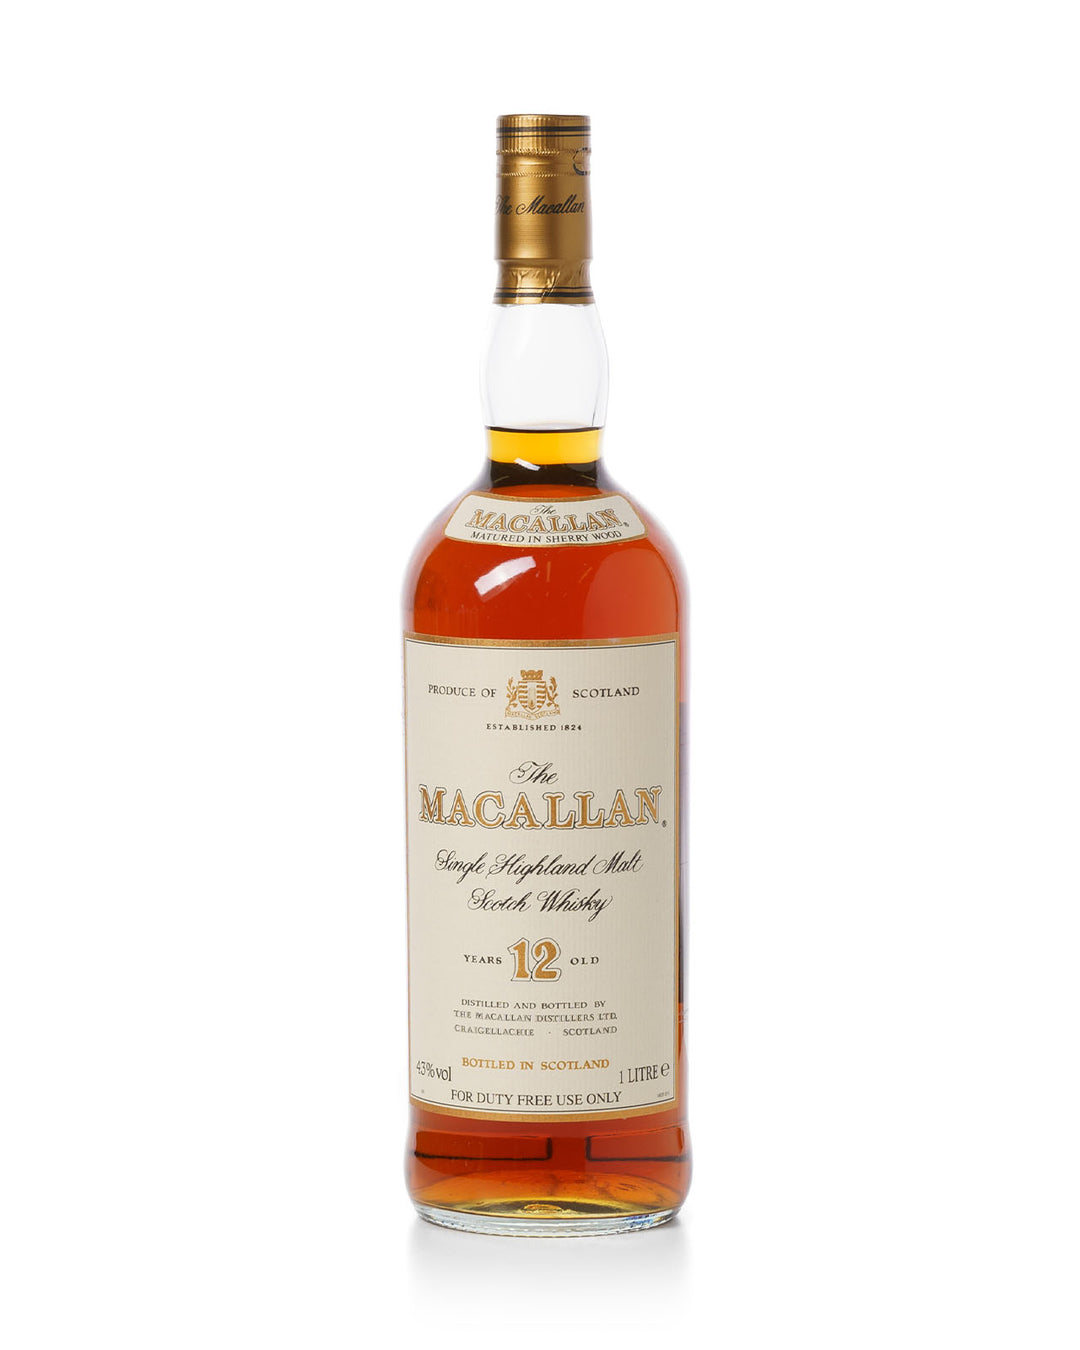 Macallan 12 Year Old Sherry Cask 1 Litre Foil Capsule With Original Box